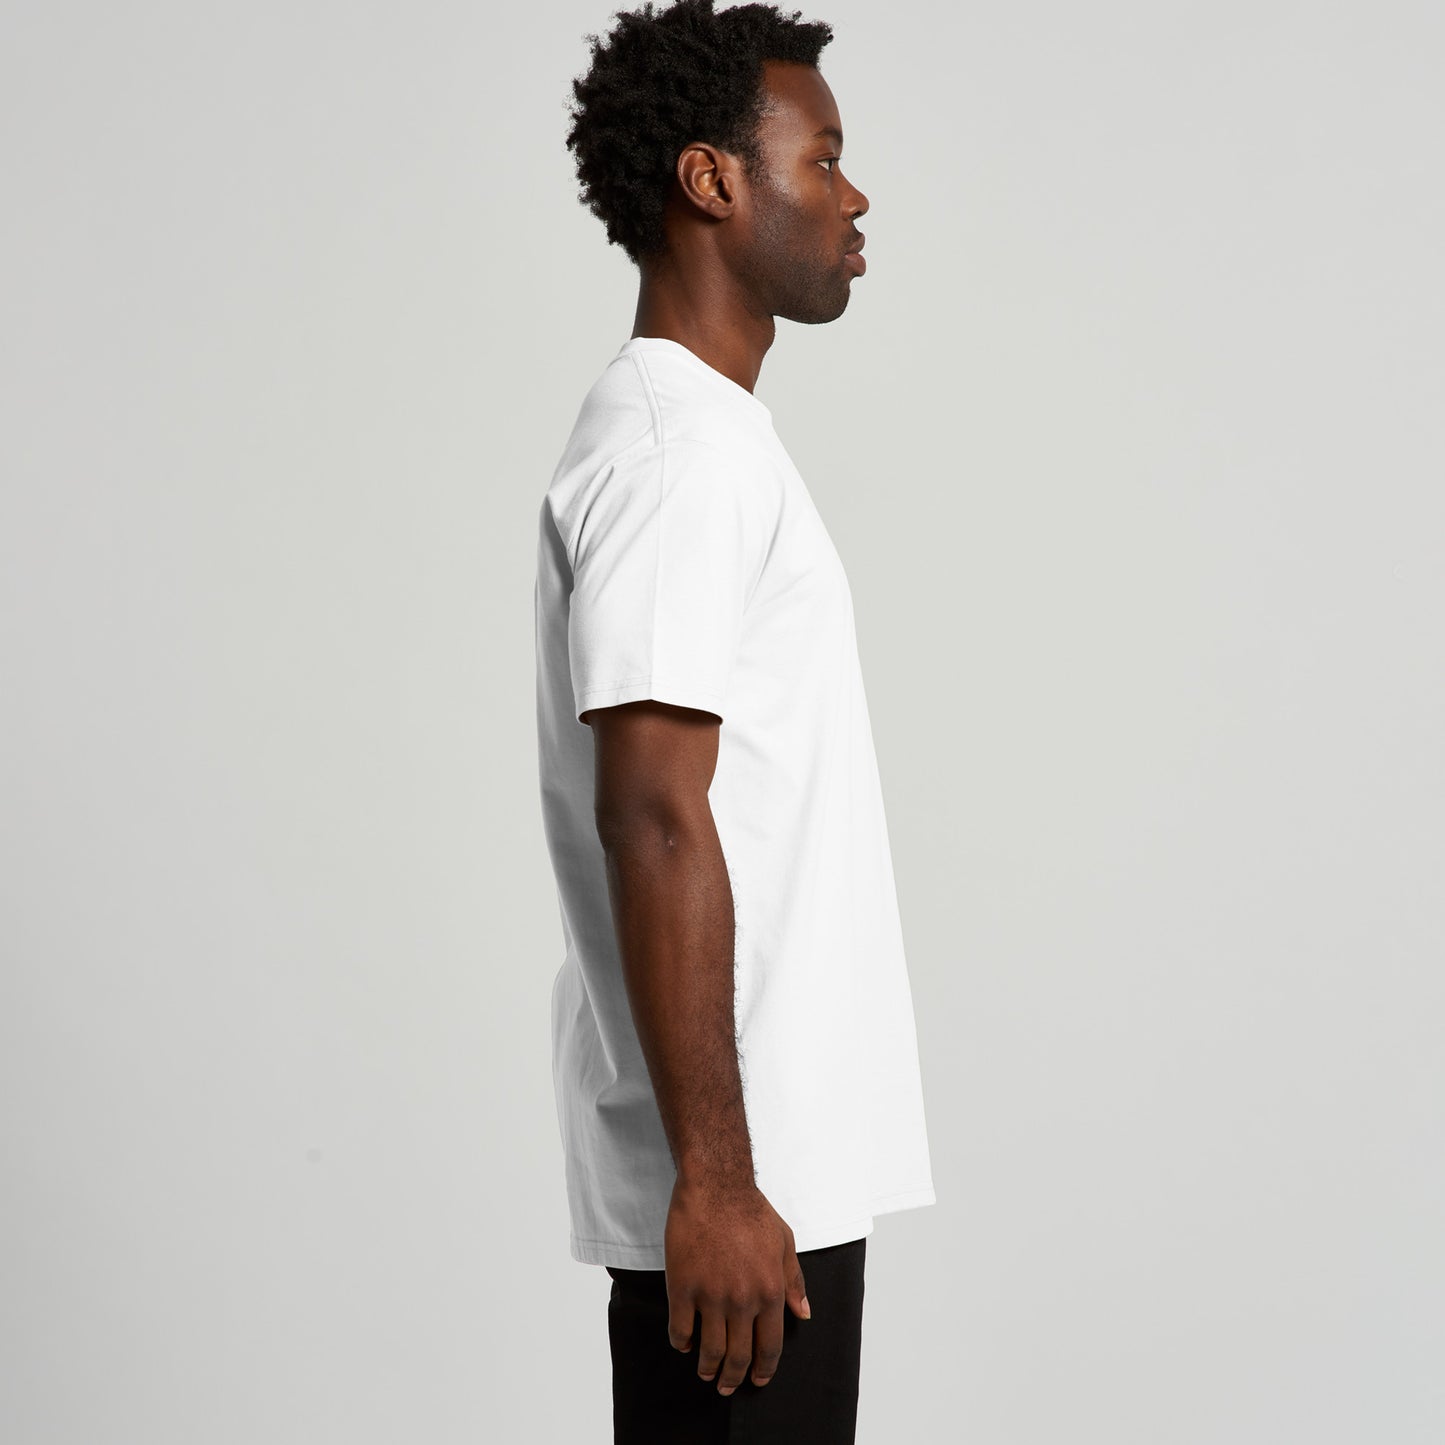 As Colour - Staple Recycled Tee - 5077